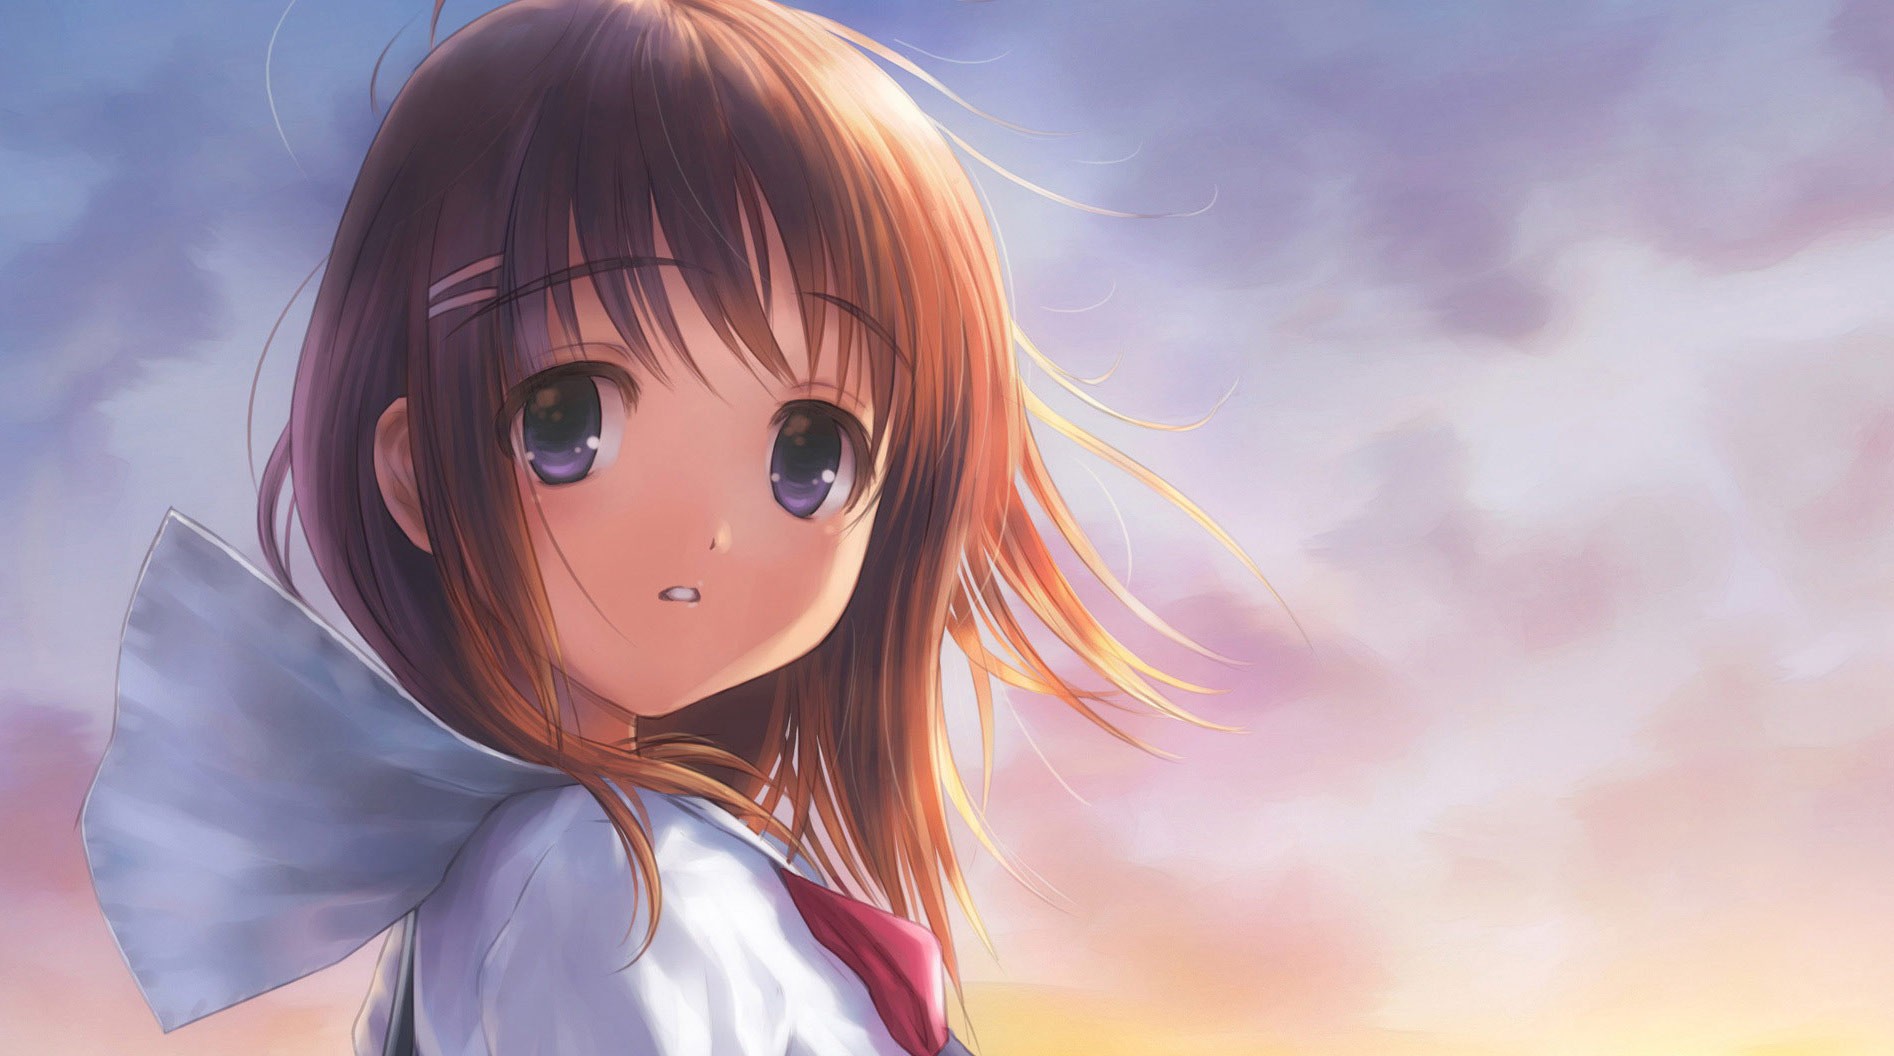  28 2015 By Stephen Comments Off on Cute Anime Girl HD Wallpapers